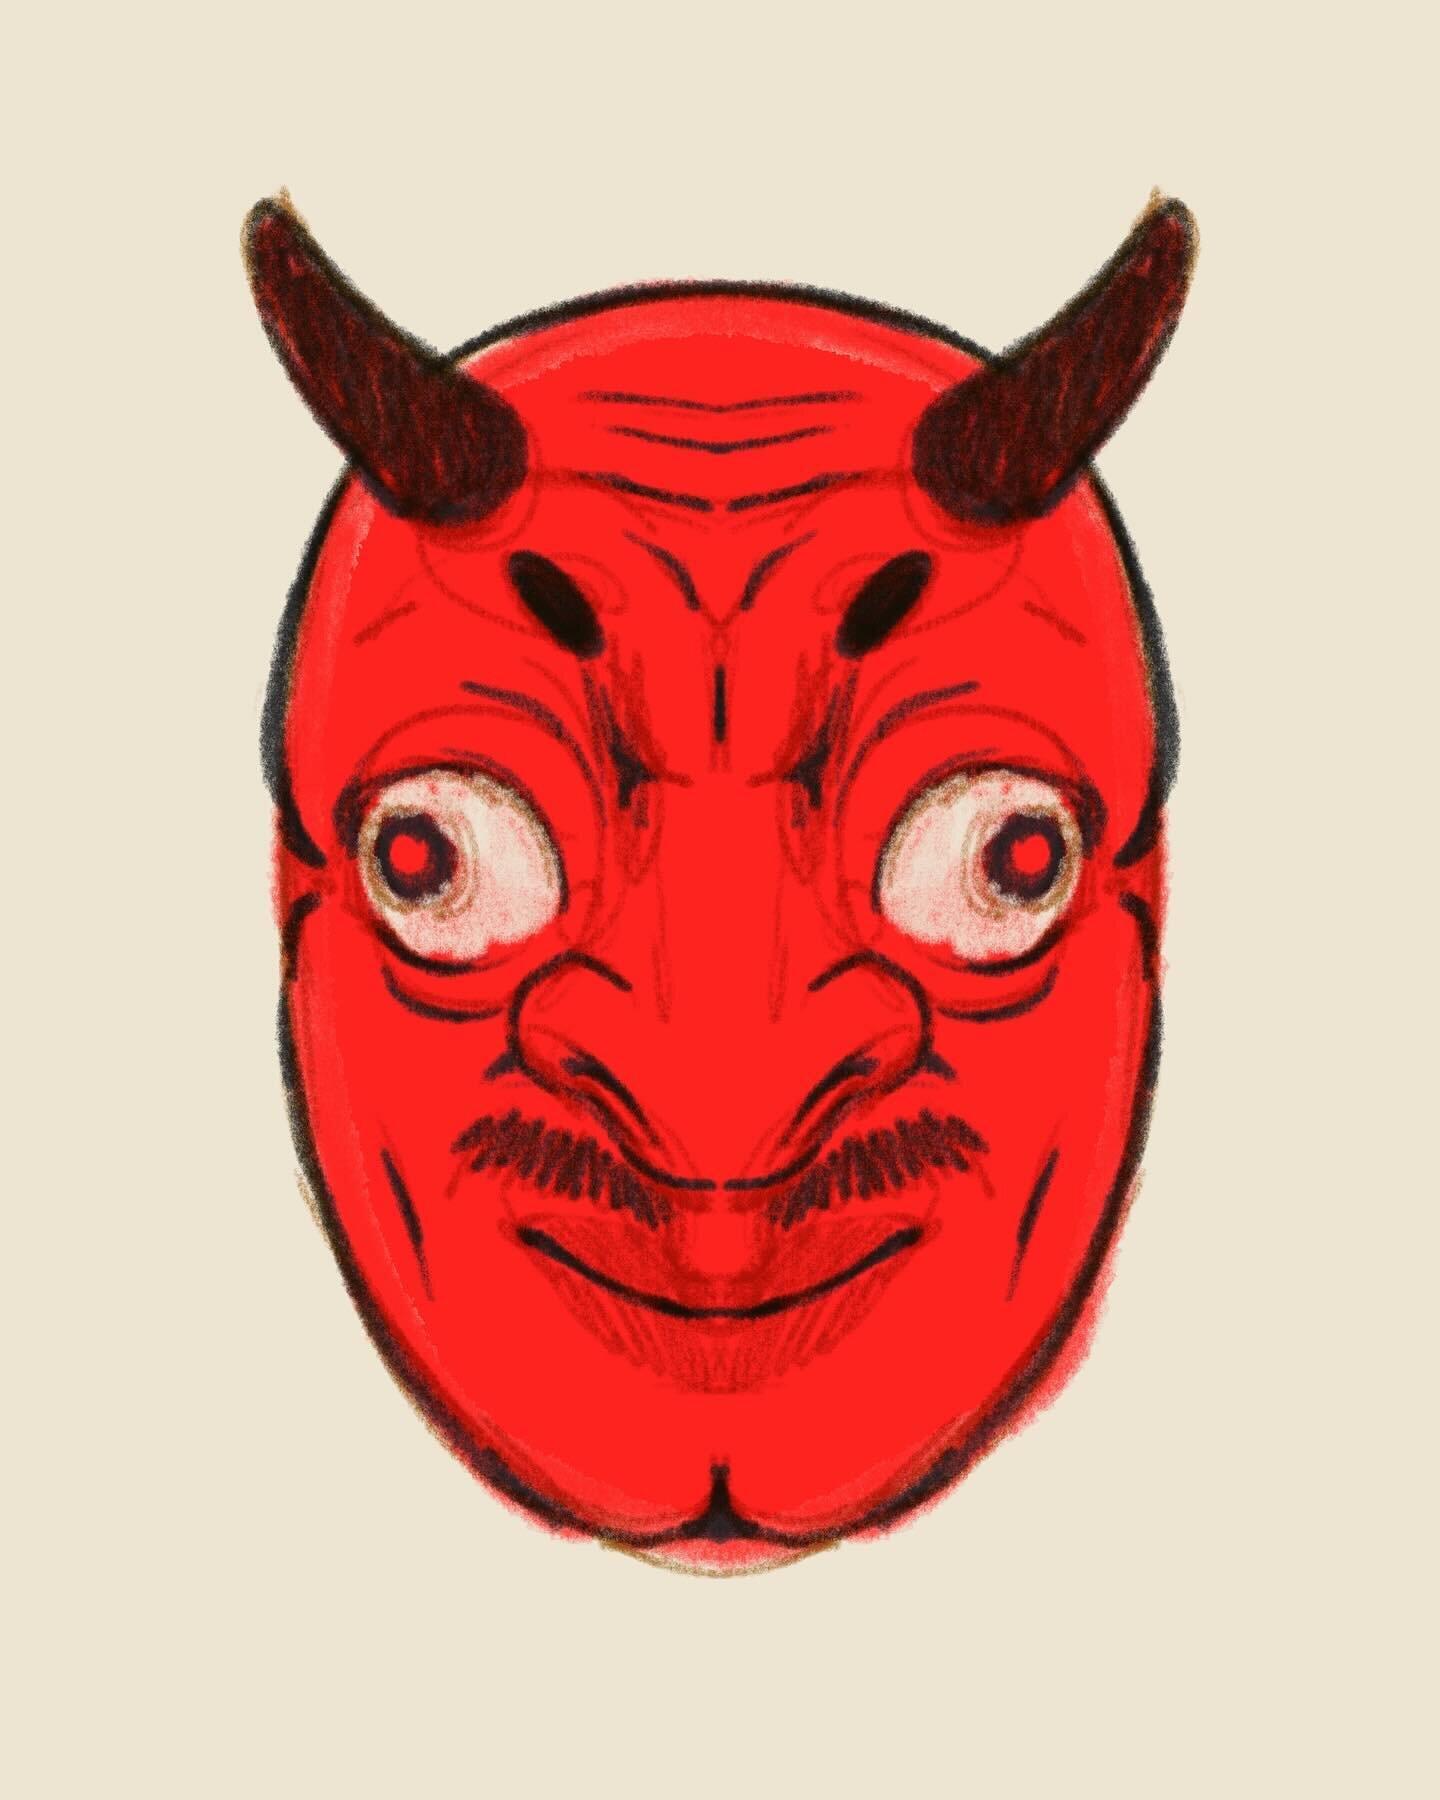 Saturday is to indulge in devilish delights. 

What are all you lil devils getting into today and into the night? 

#devilishdelights #devilish #mexicanmasks #nohmask #archetypes #carljung #shedevil